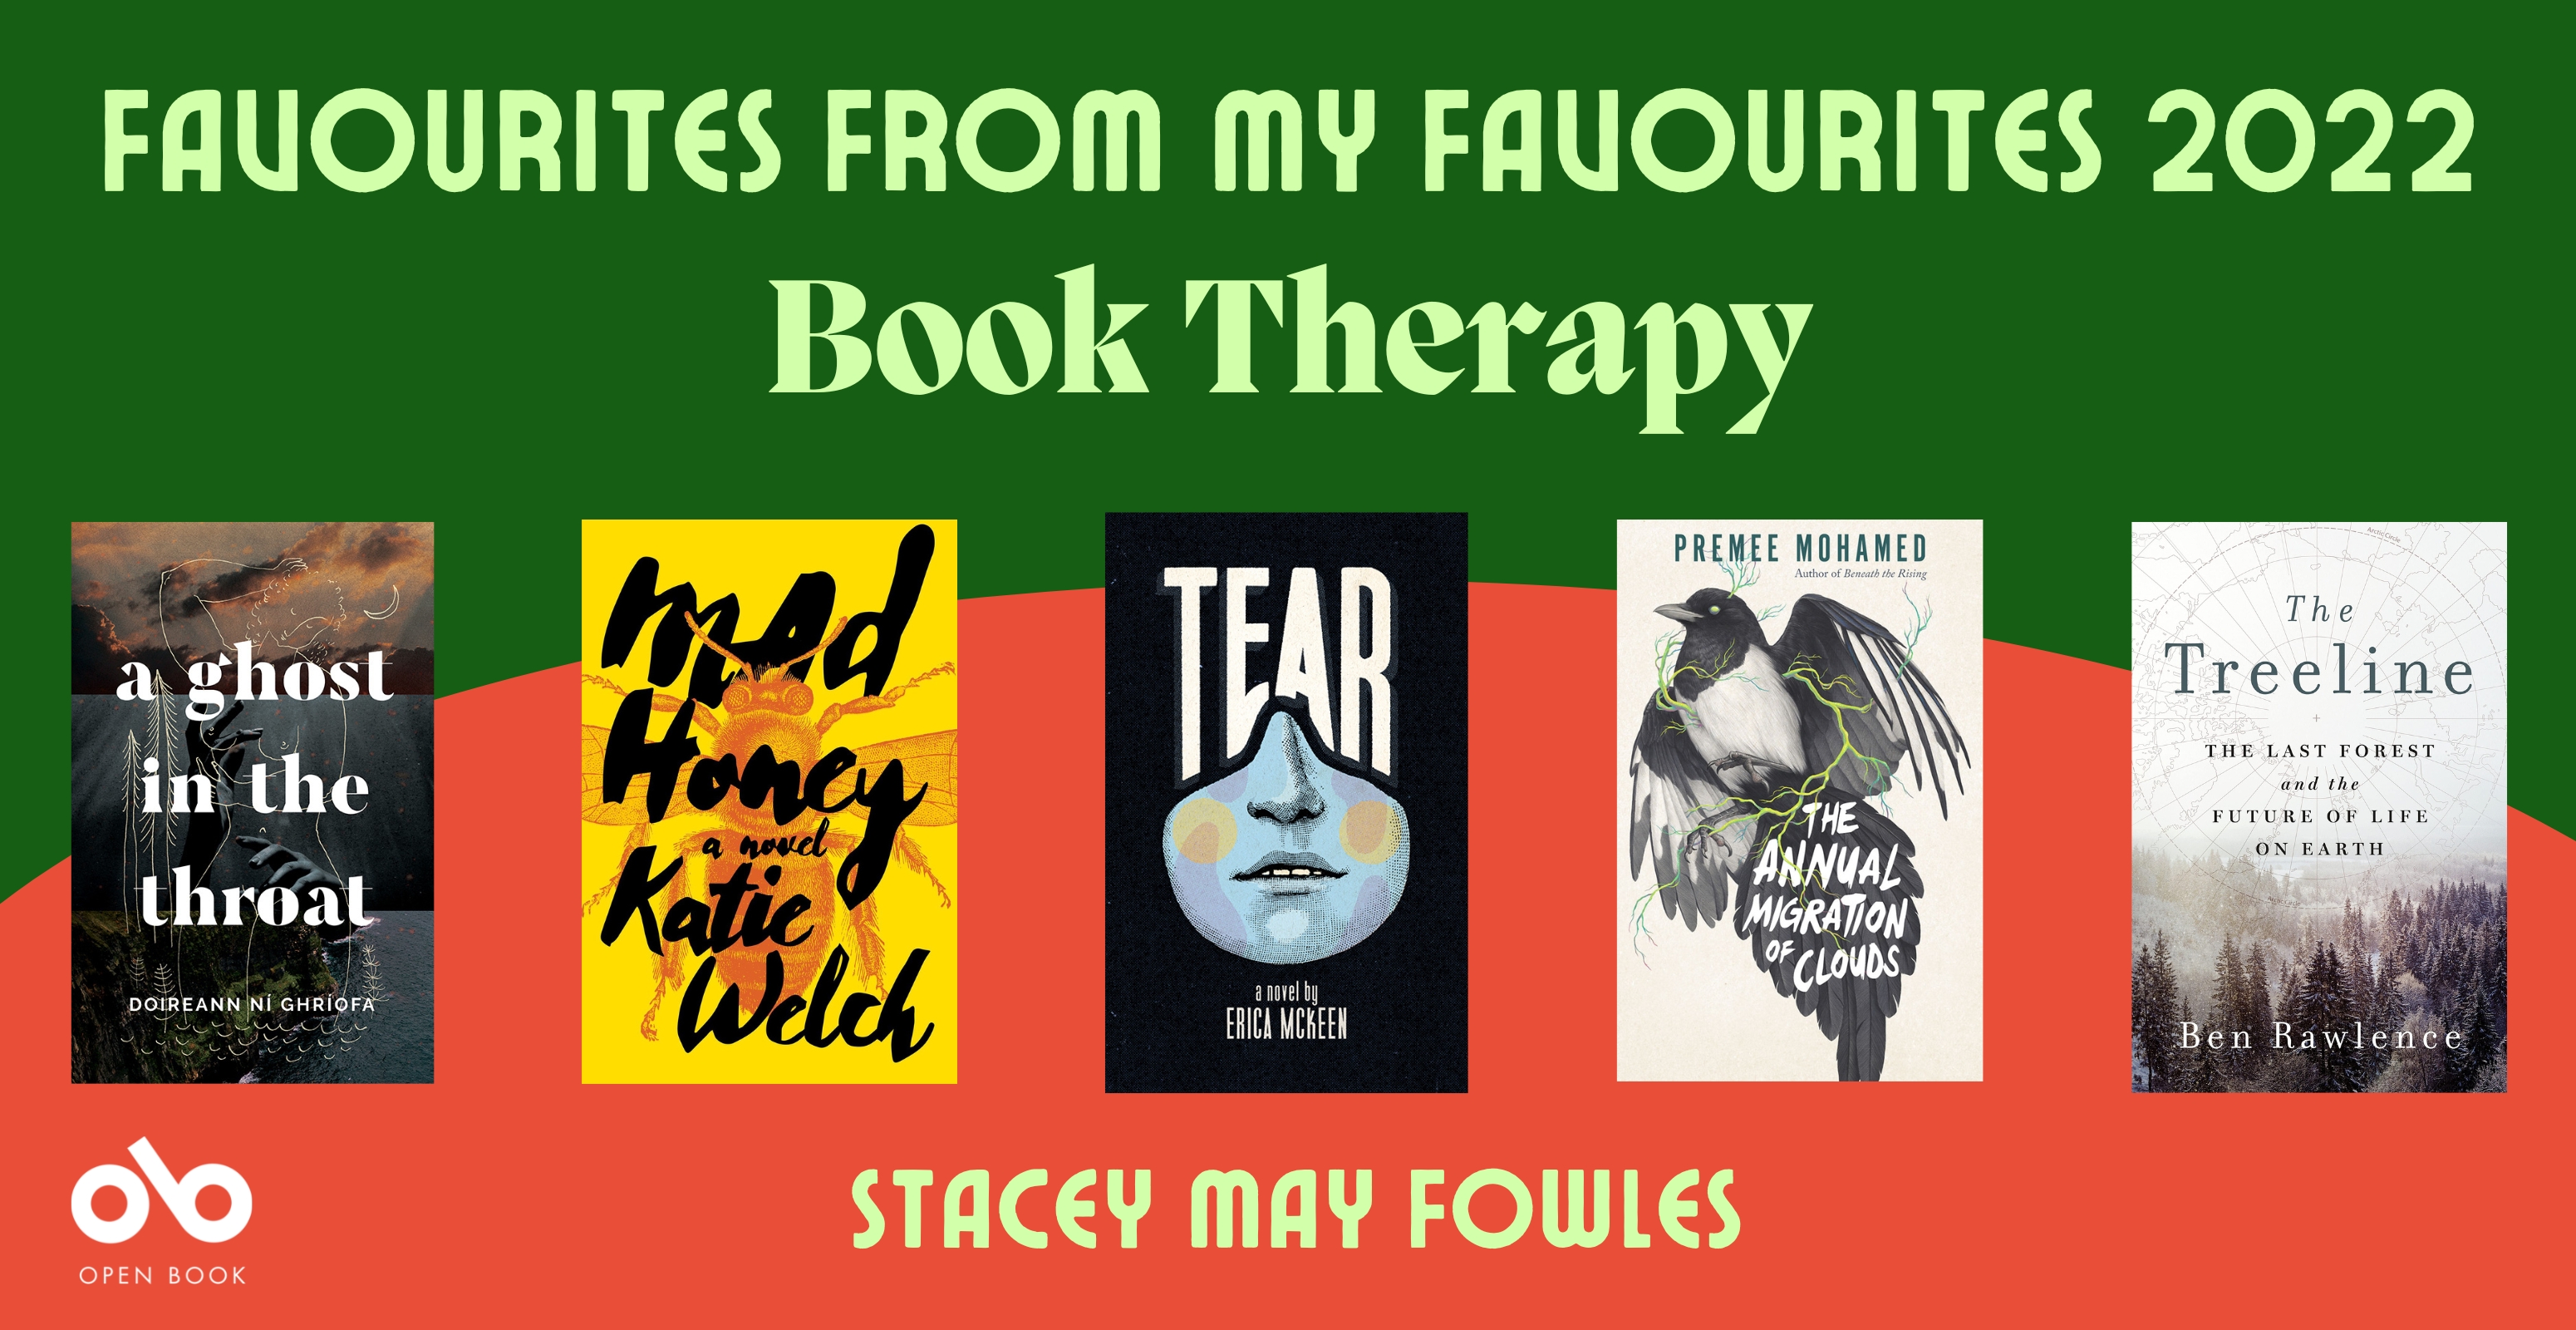 Book Therapy Favourites from my favourites 2022